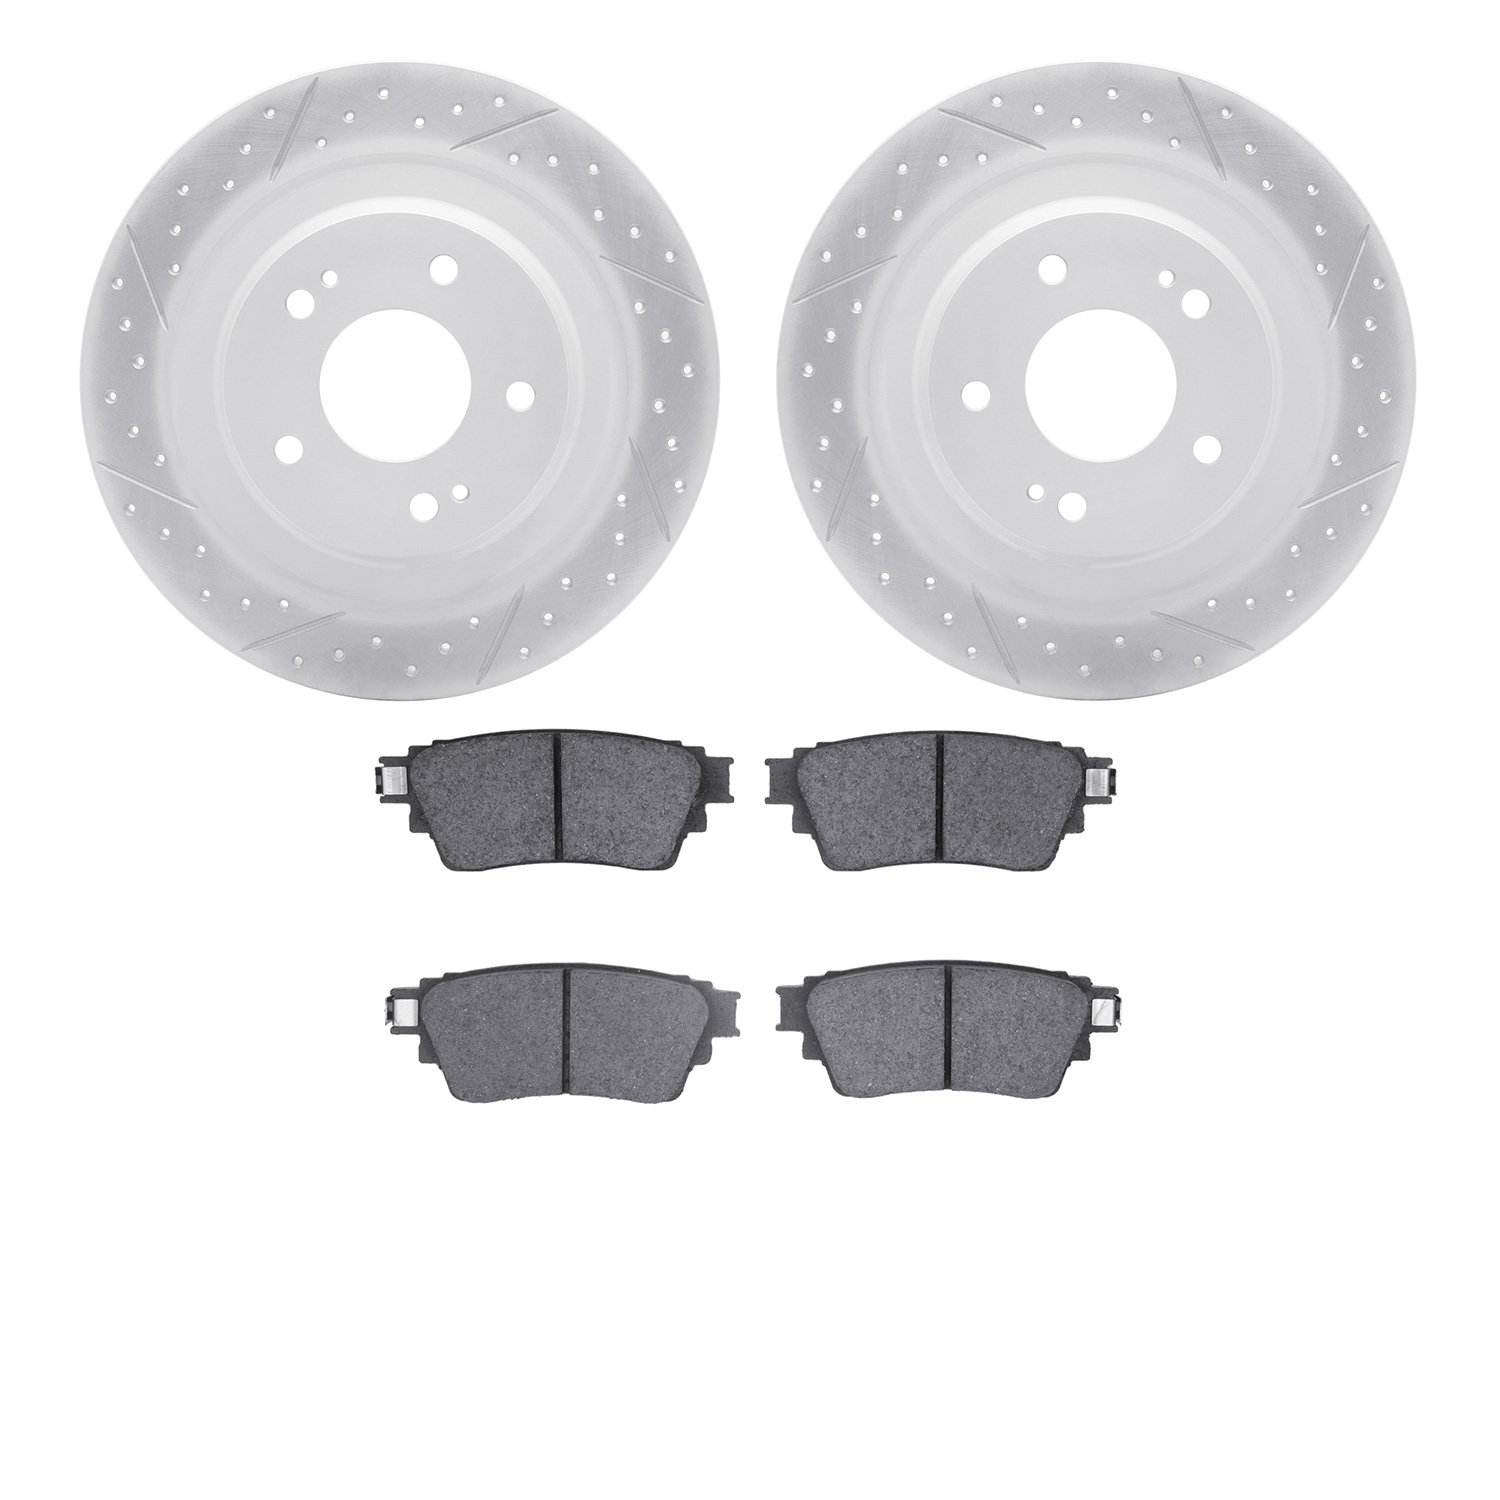 2502-72035 Geoperformance Drilled/Slotted Rotors w/5000 Advanced Brake Pads Kit, Fits Select Mitsubishi, Position: Rear